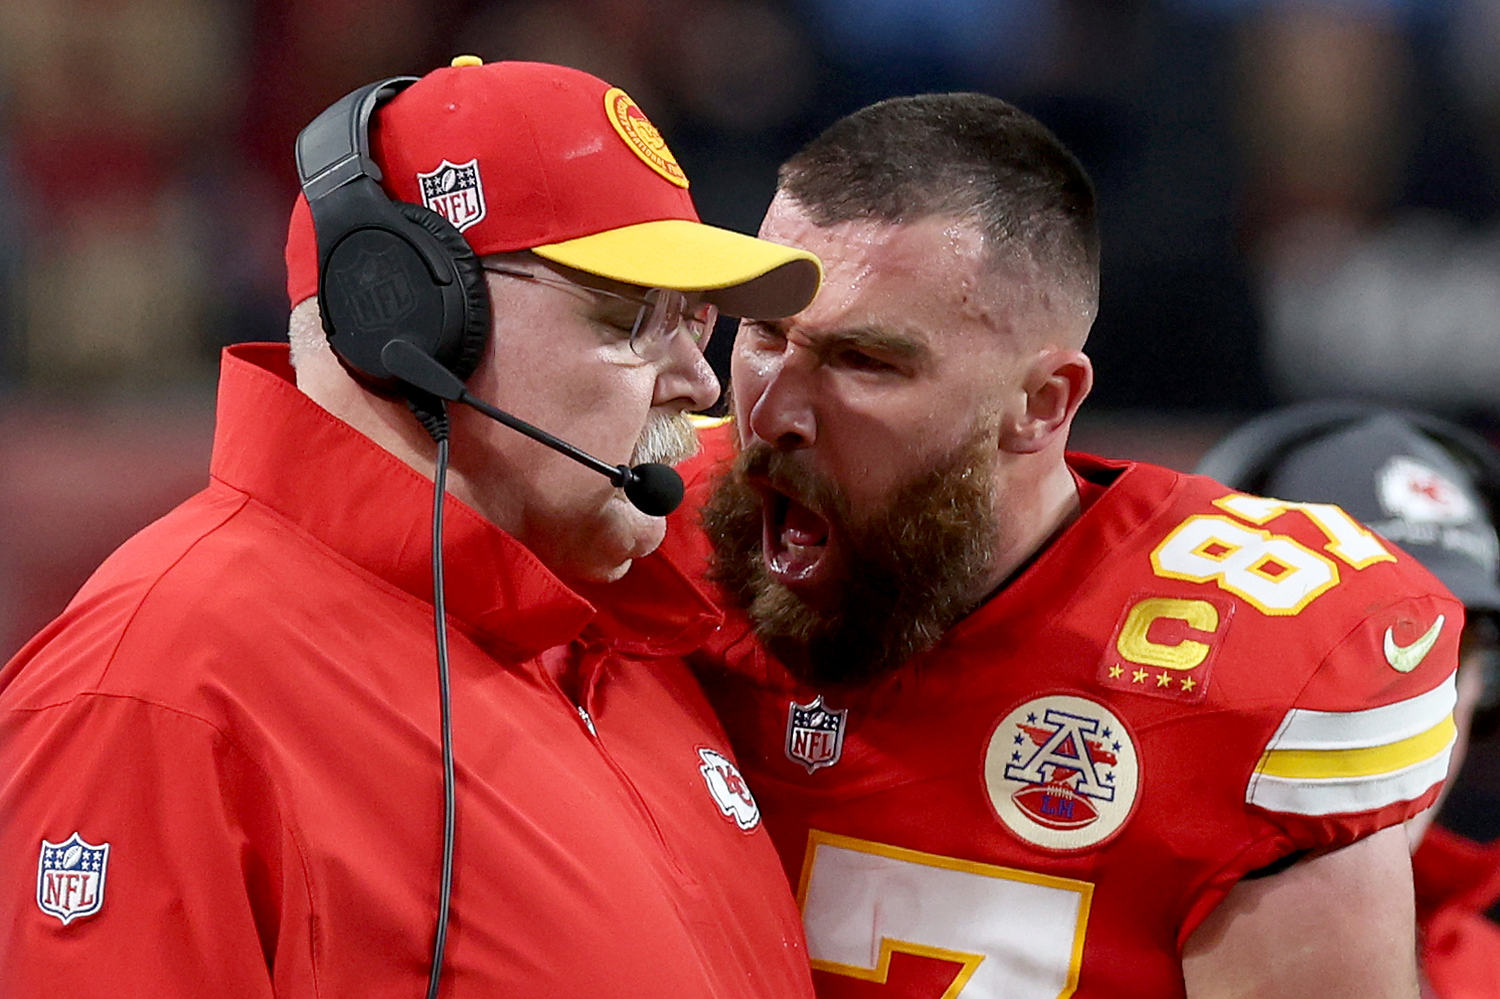 jason kelce says travis ‘crossed a line’ when he bumped andy reid during the super bowl